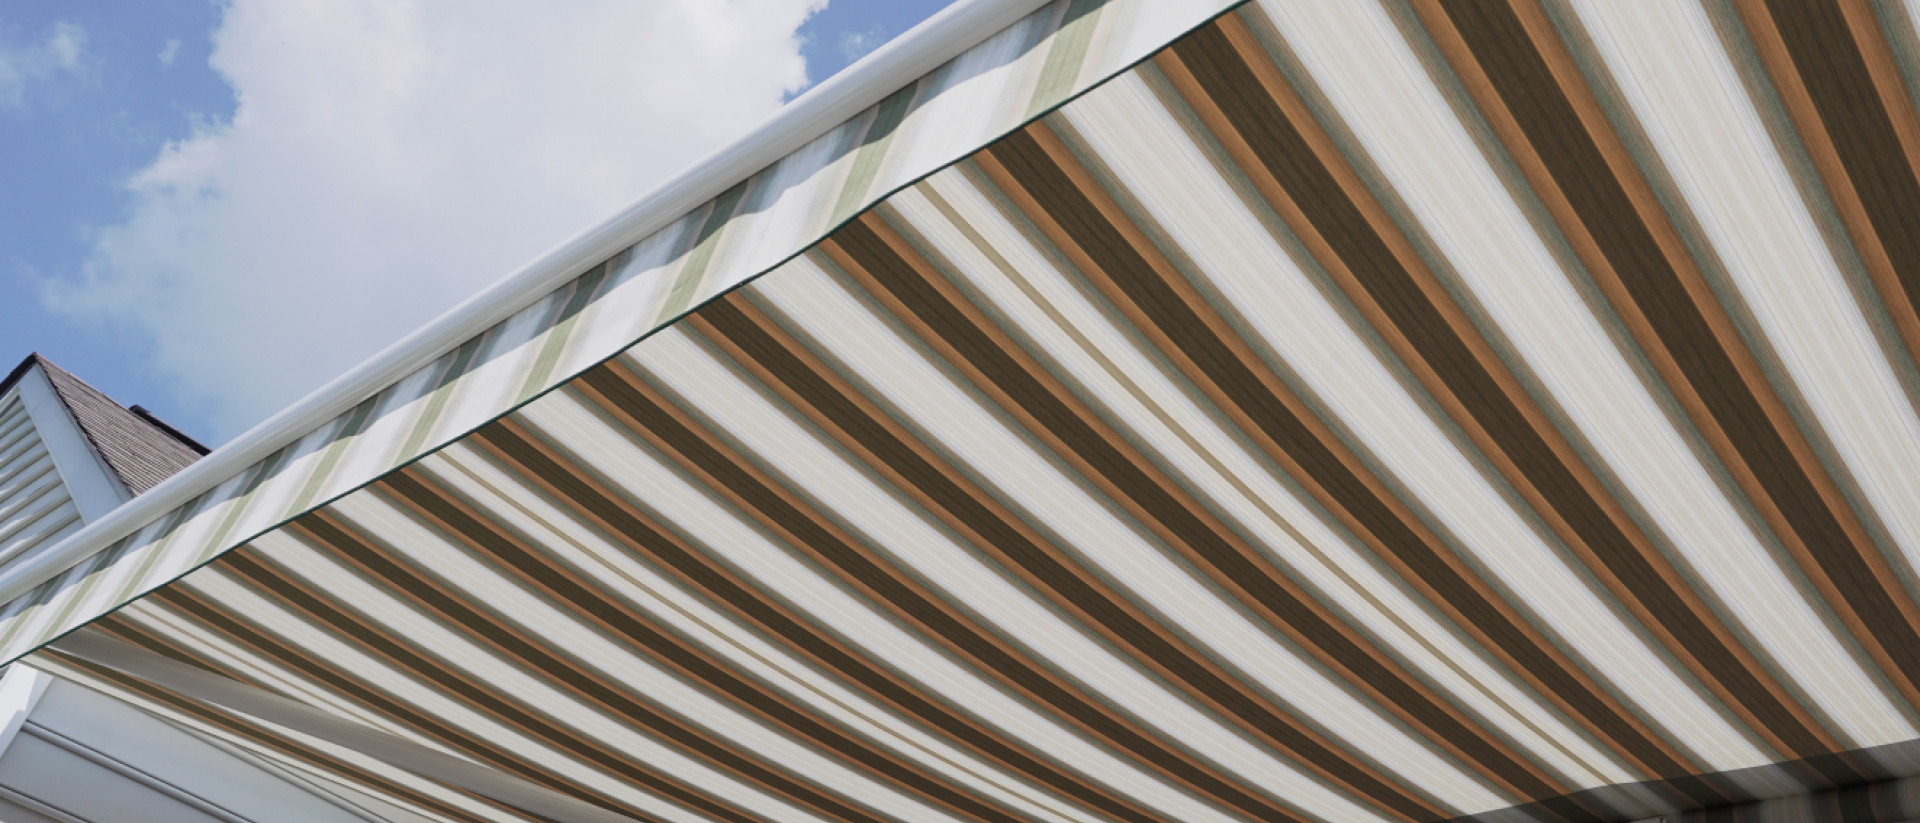 A stripe patterned retractable awning